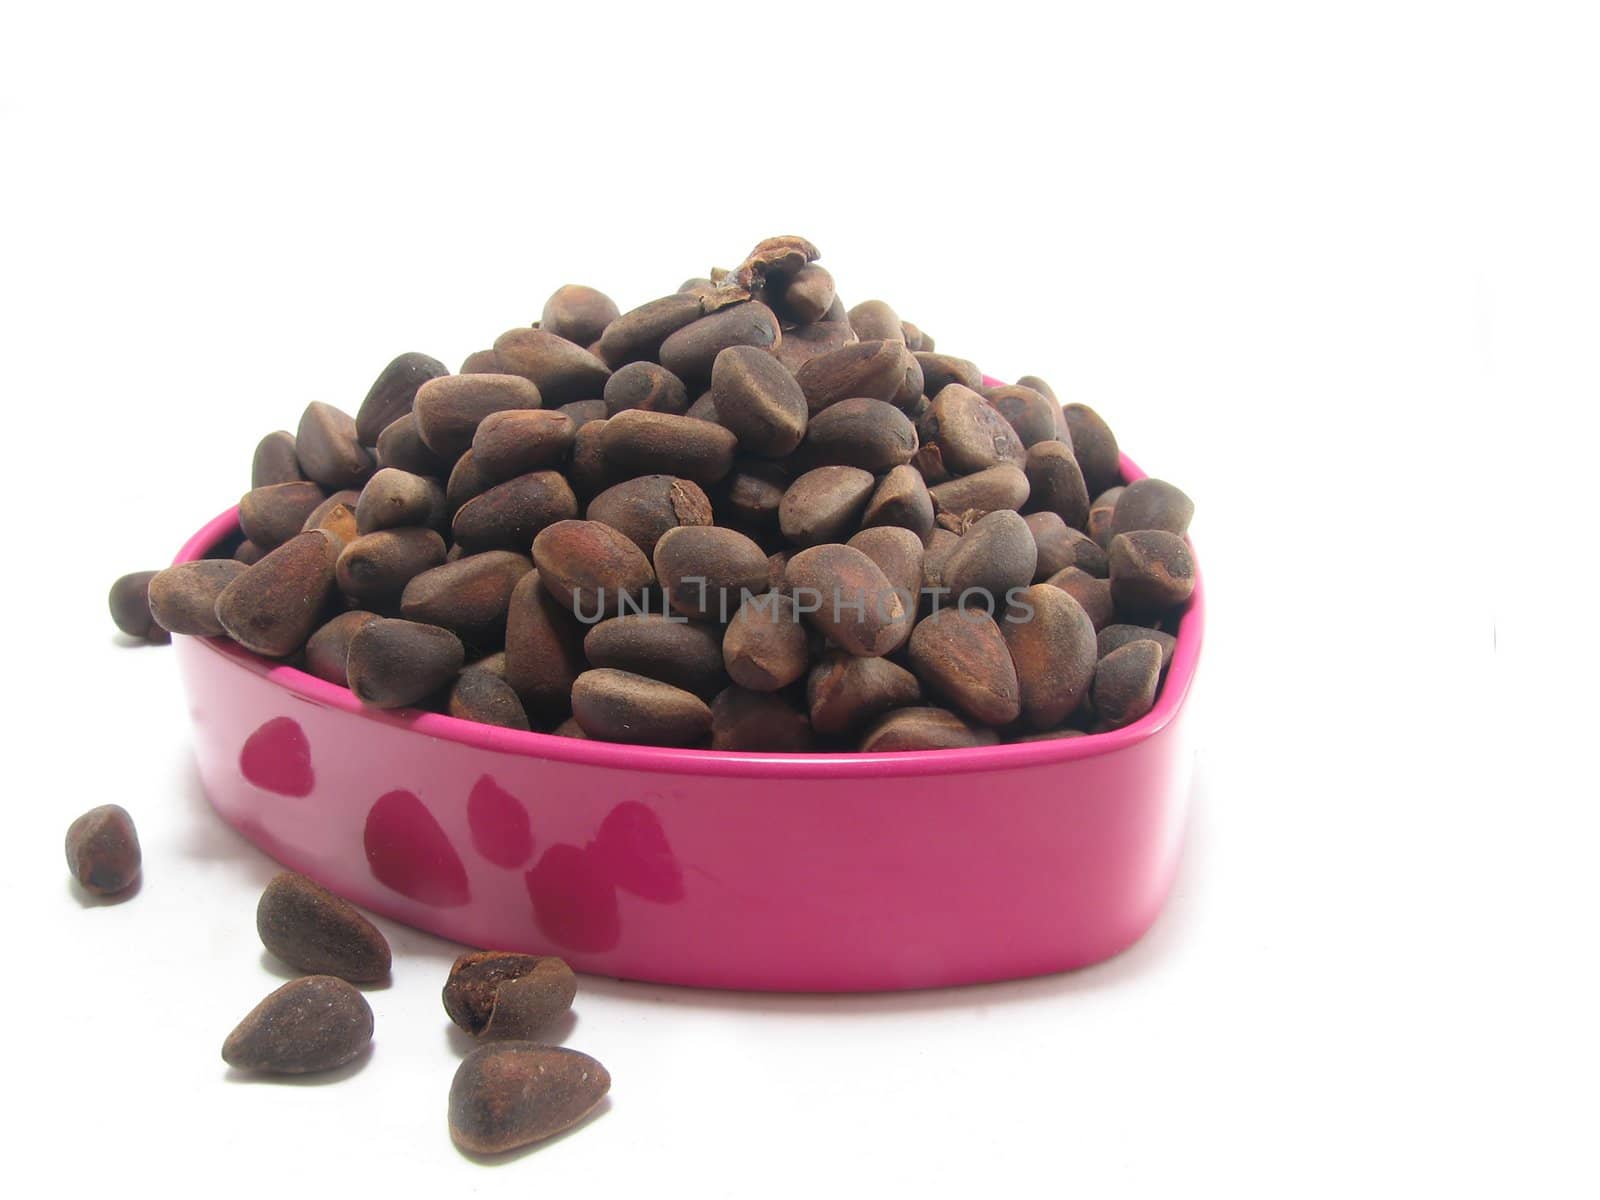 Coffee beans in a pink box, in the form of heart